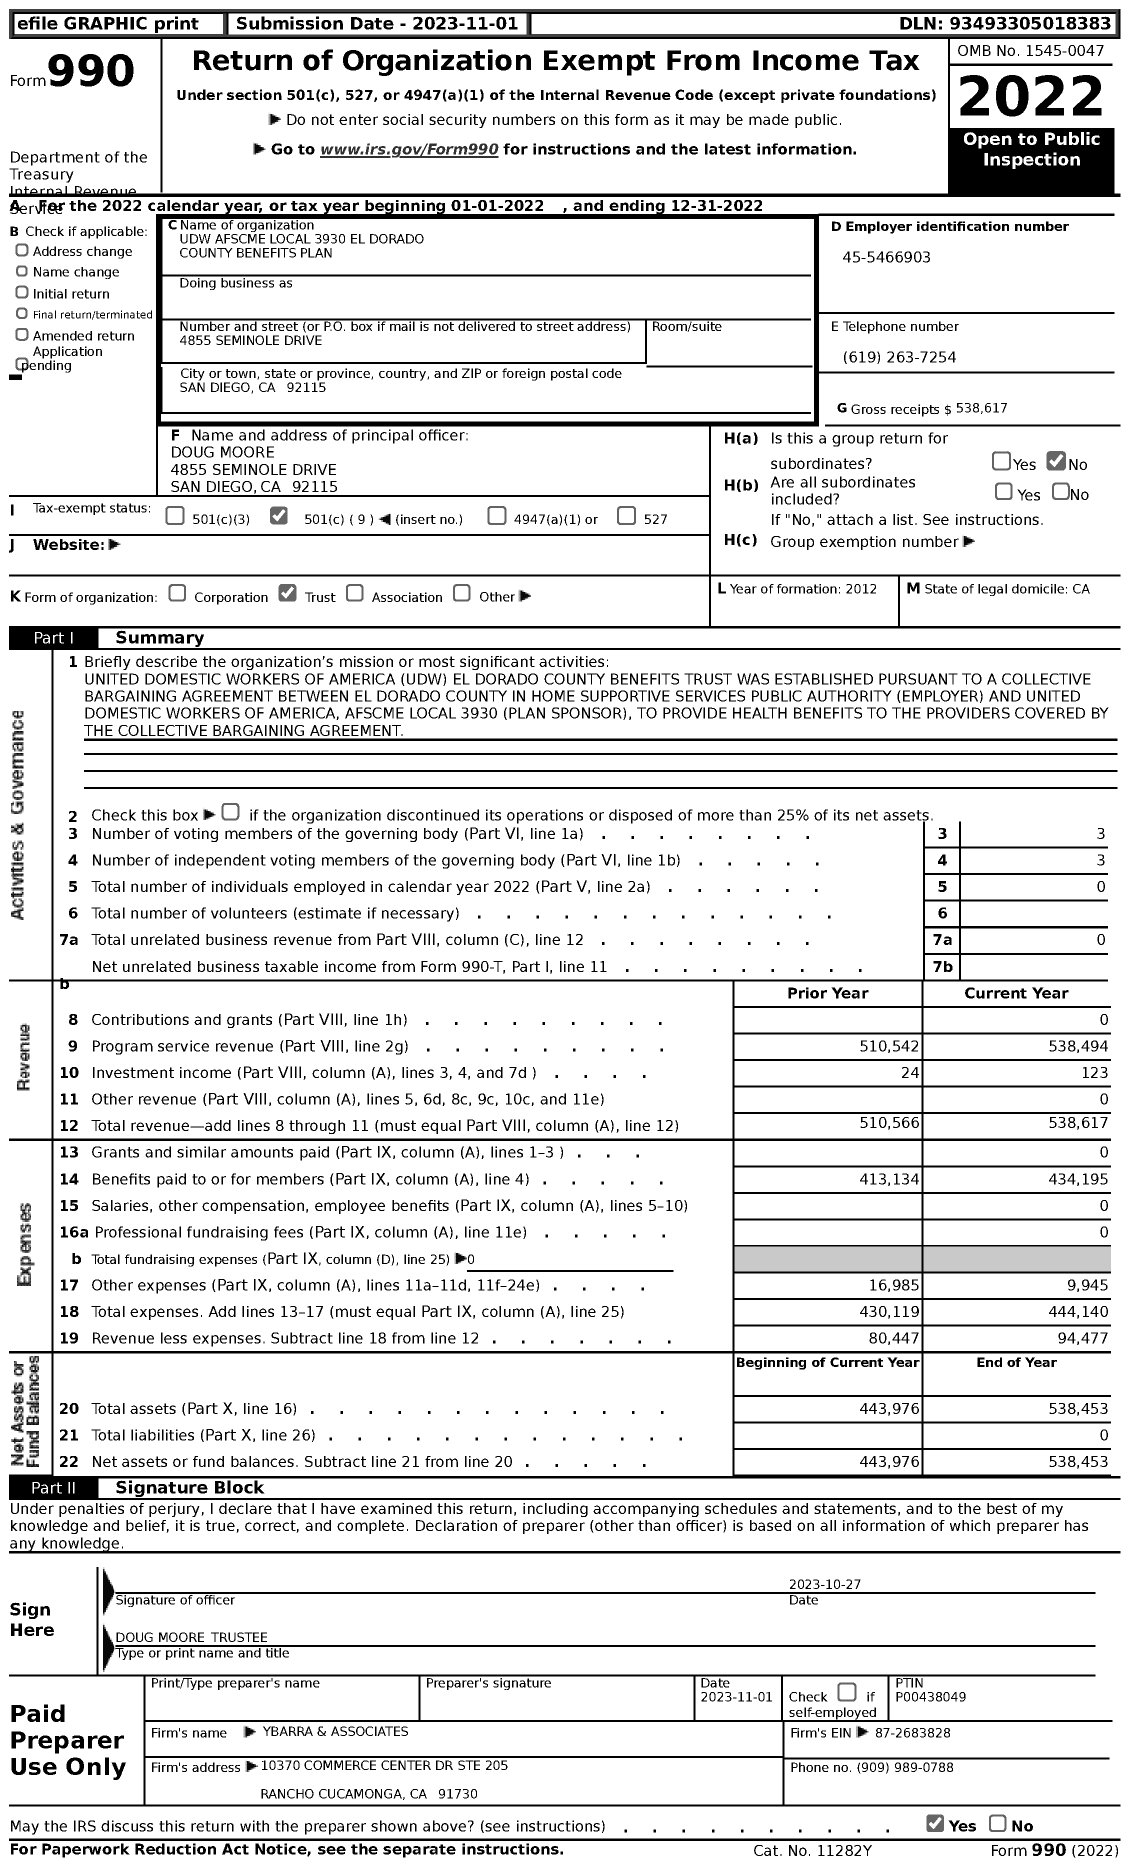 Image of first page of 2022 Form 990 for Udw AFSCME Local 3930 El Dorado County Benefits Plan